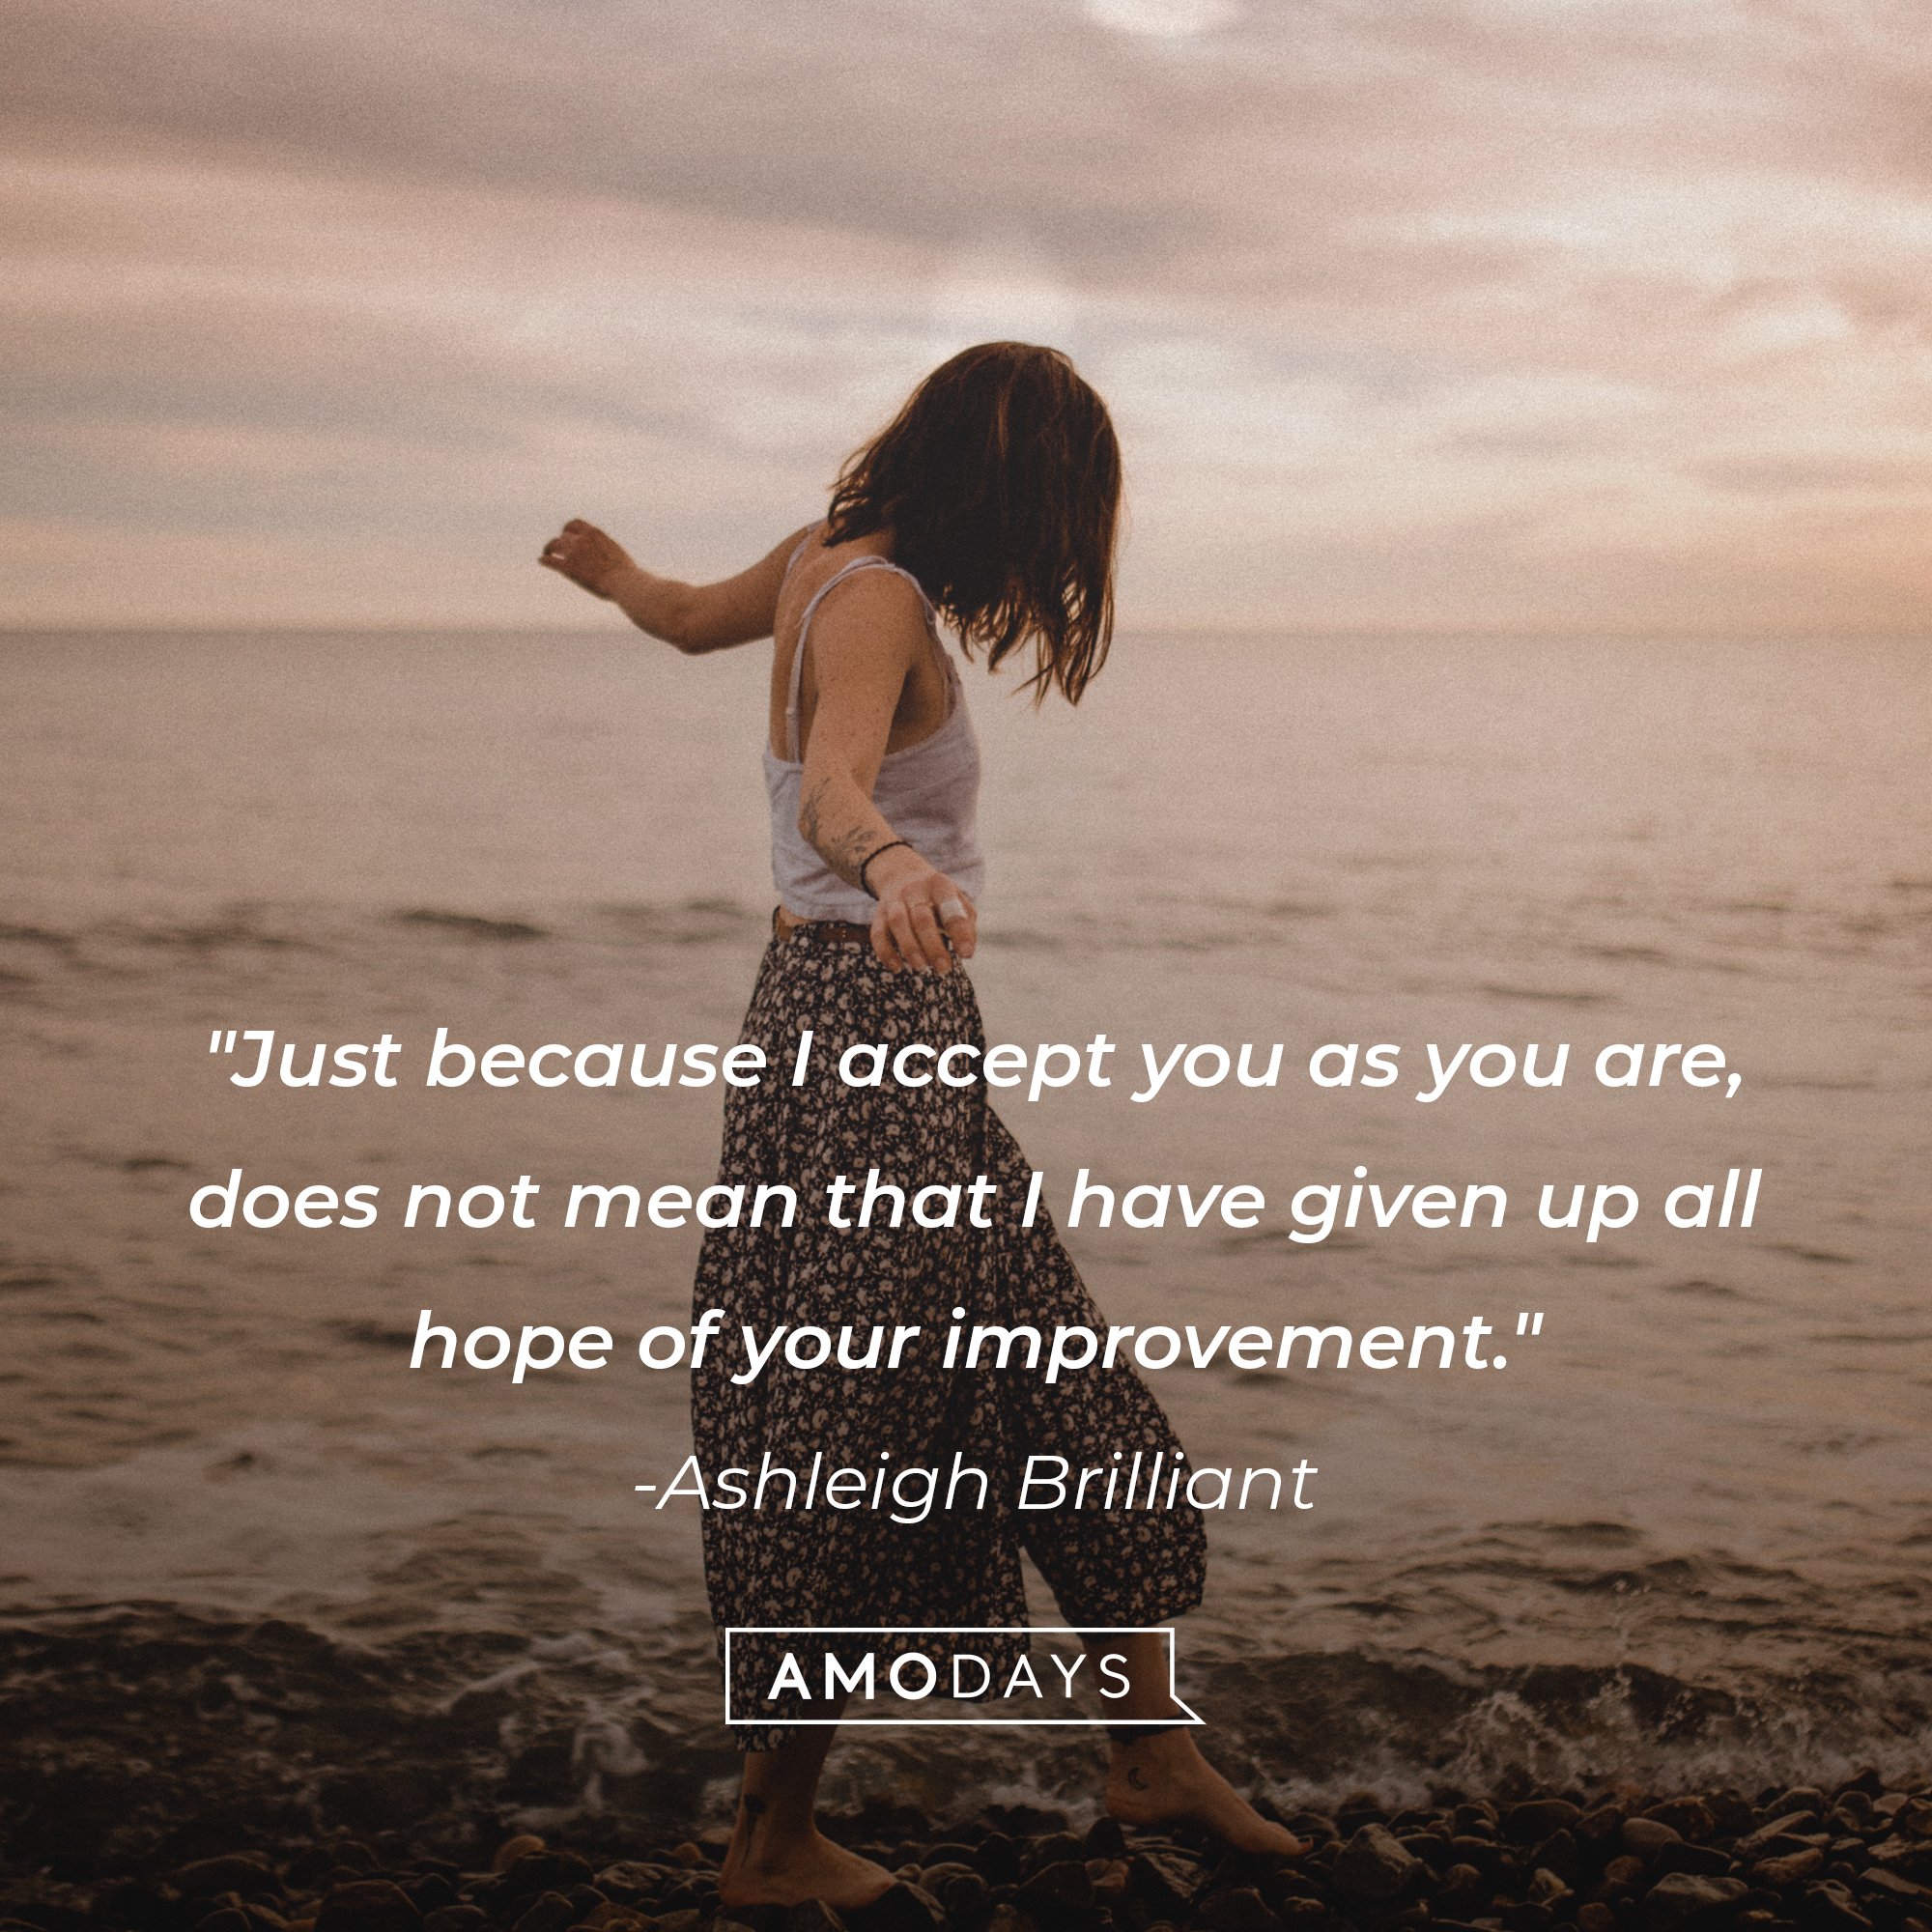 Ashleigh Brilliant's quote: "Just because I accept you as you are, does not mean that I have given up all hope of your improvement." | Image: AmoDays